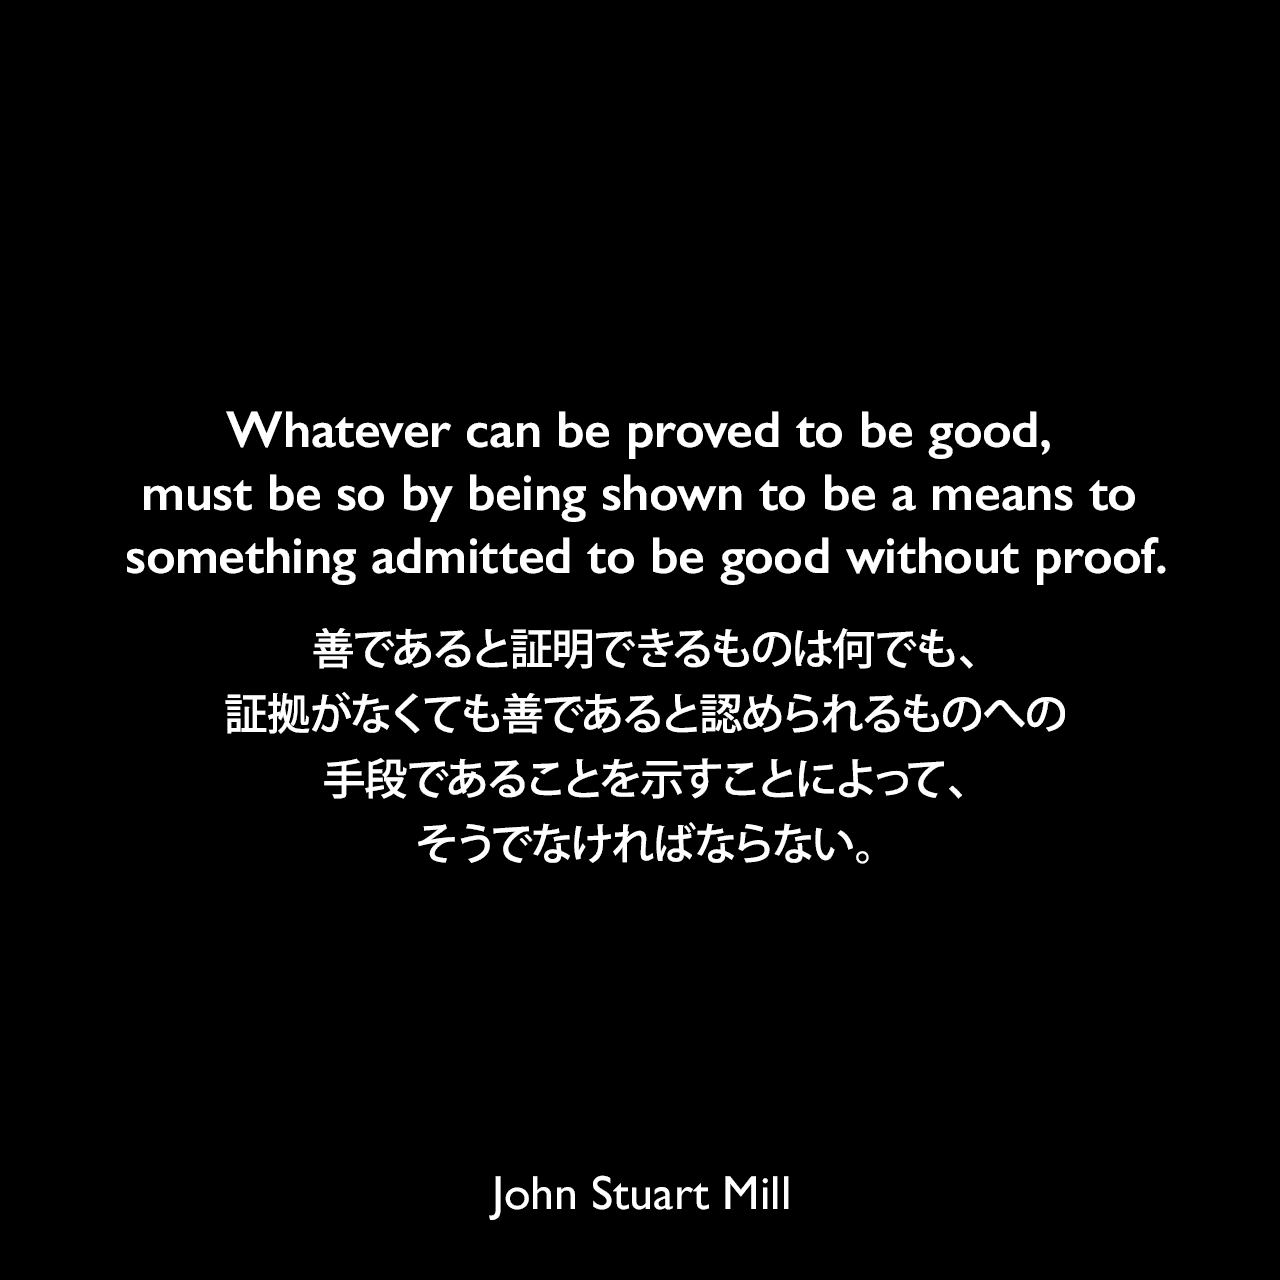 Whatever can be proved to be good, must be so by being shown to be a means to something admitted to be good without proof.善であると証明できるものは何でも、証拠がなくても善であると認められるものへの手段であることを示すことによって、そうでなければならない。- ジョン・スチュアート・ミルによる本「功利主義論」よりJohn Stuart Mill